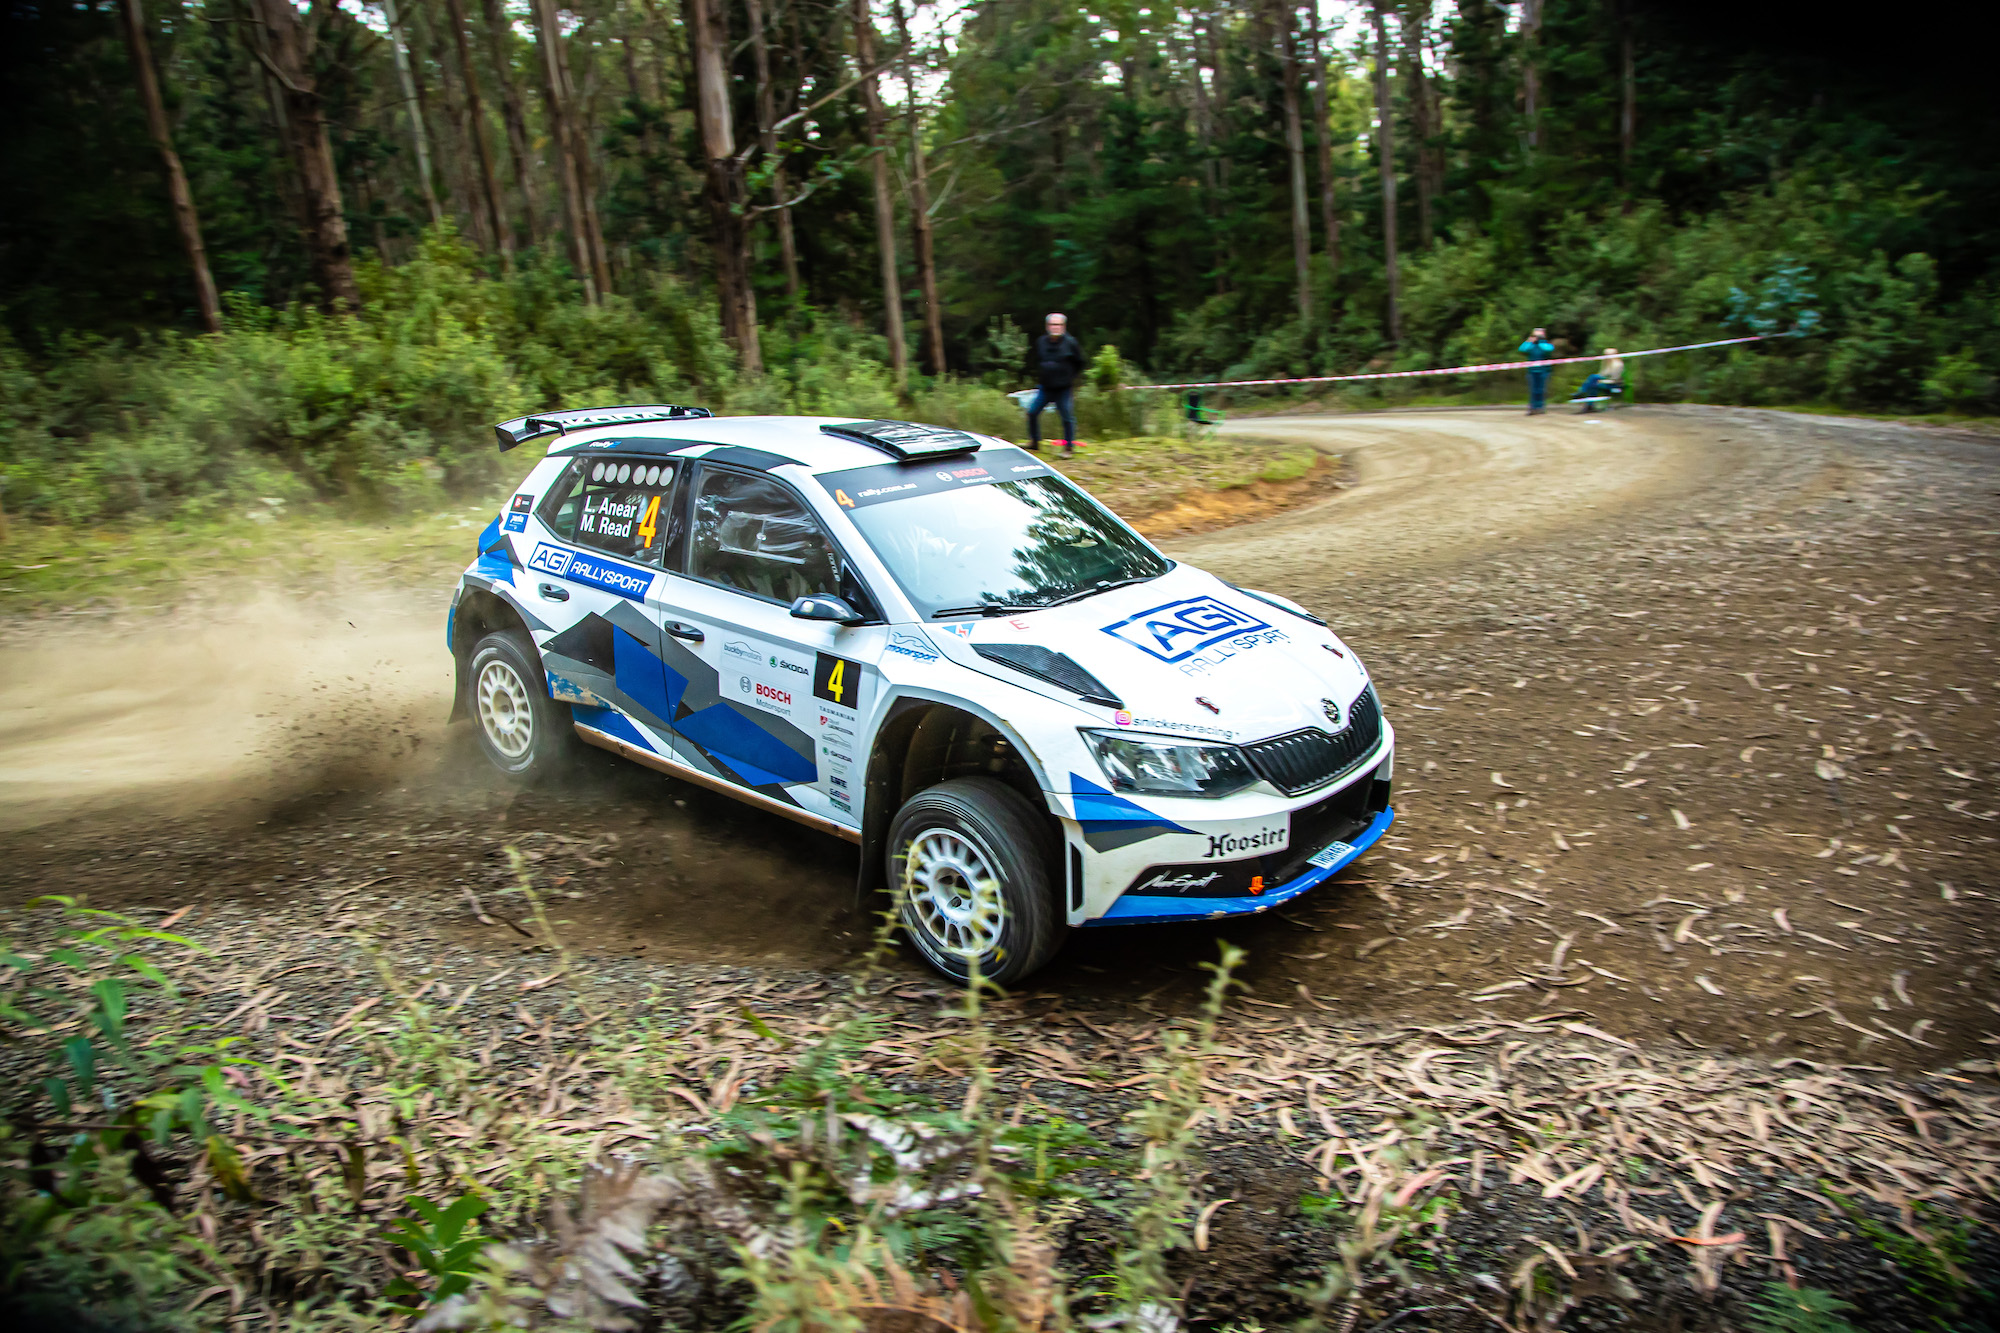 quinn wins heat 2, lewis claims rally launceston overall